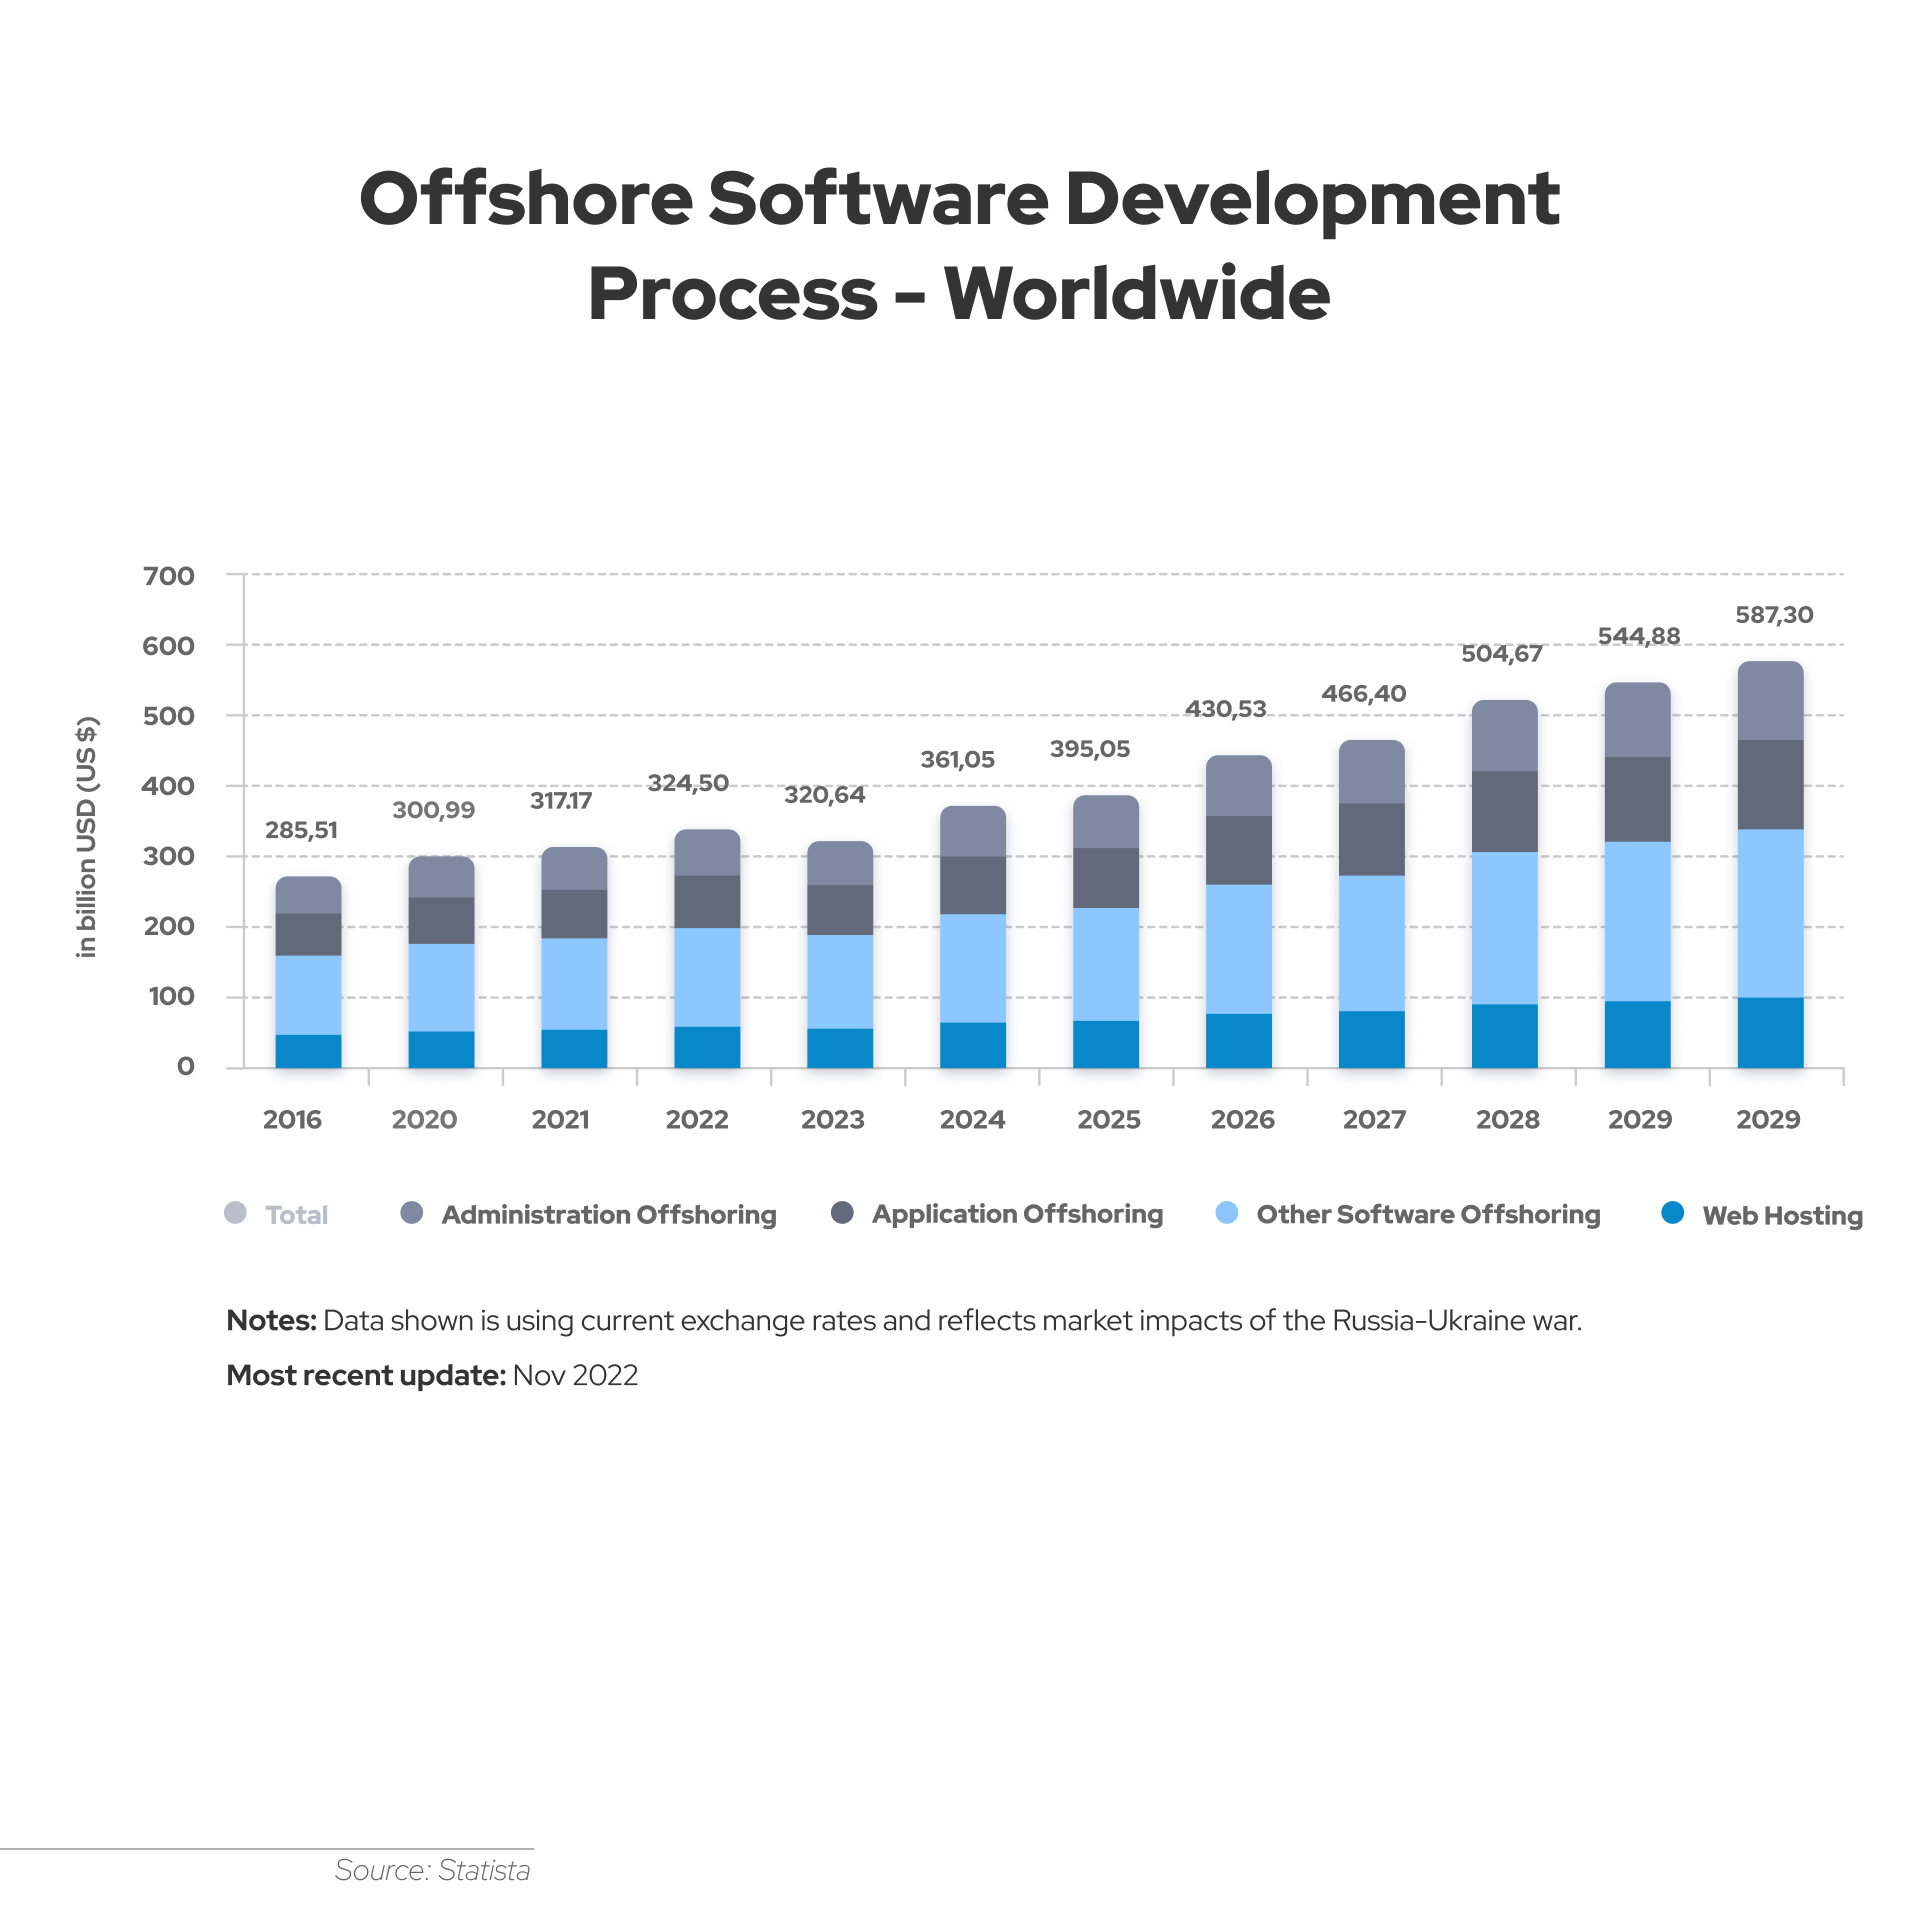 Offshoring the software development process continues to exhibit stable growth, with particular growth seen in the areas of administration offshoring, application offshoring, other software offshoring, and web hosting.